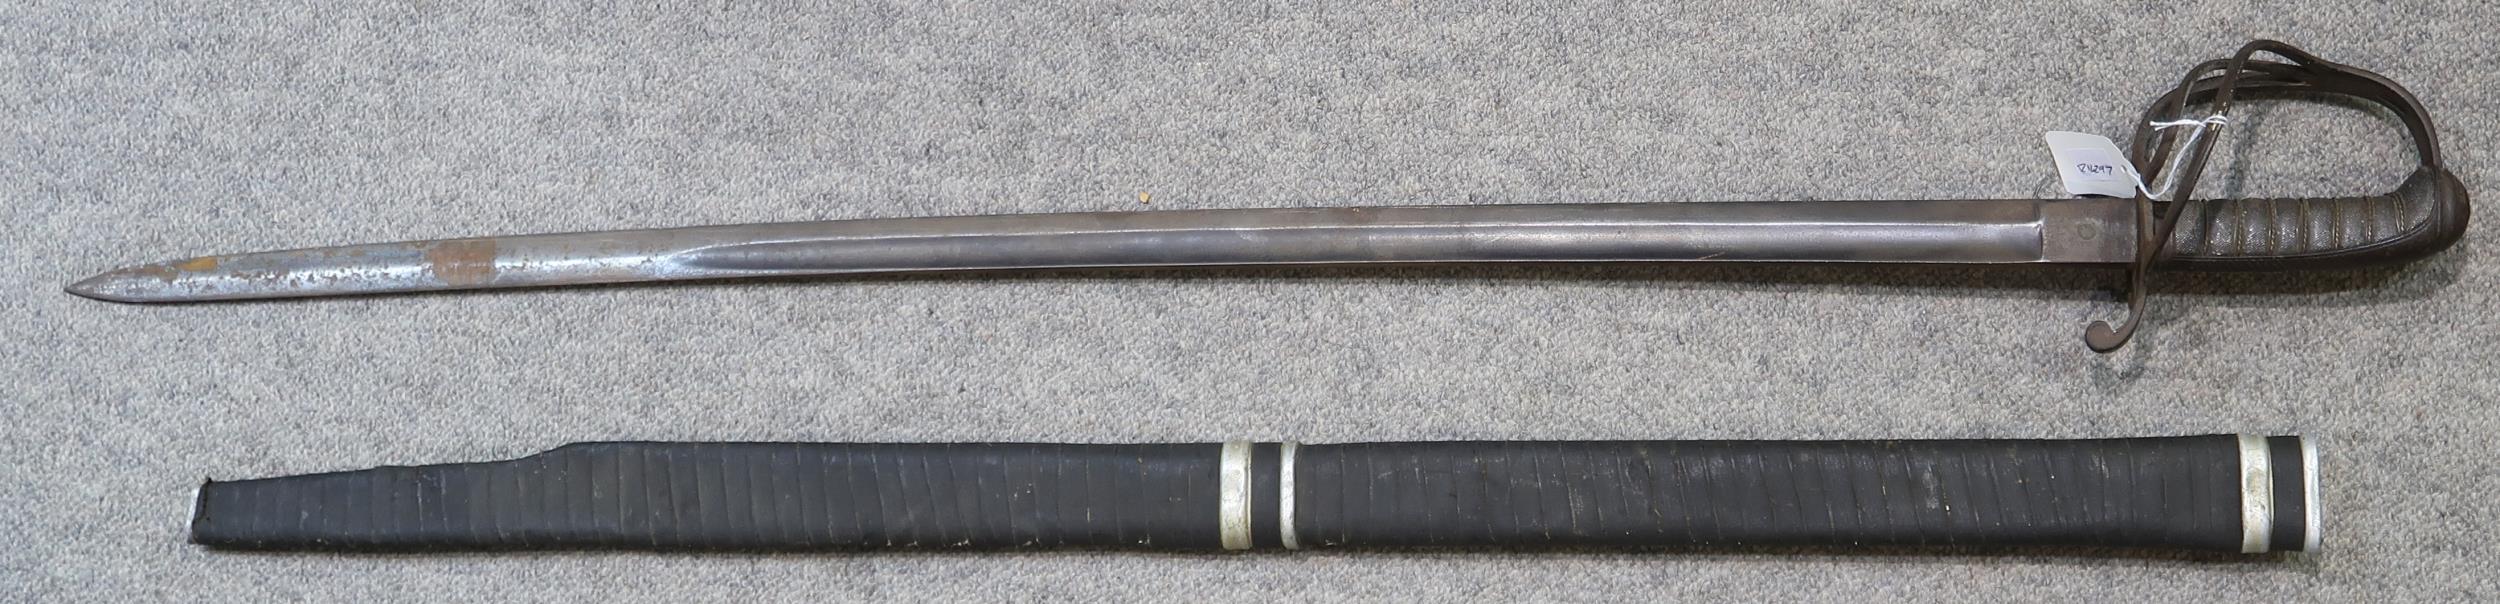 A French model 1874 Gras bayonet, dated 1876 with engraving to spine of blade, in steel scabbard, - Image 5 of 5